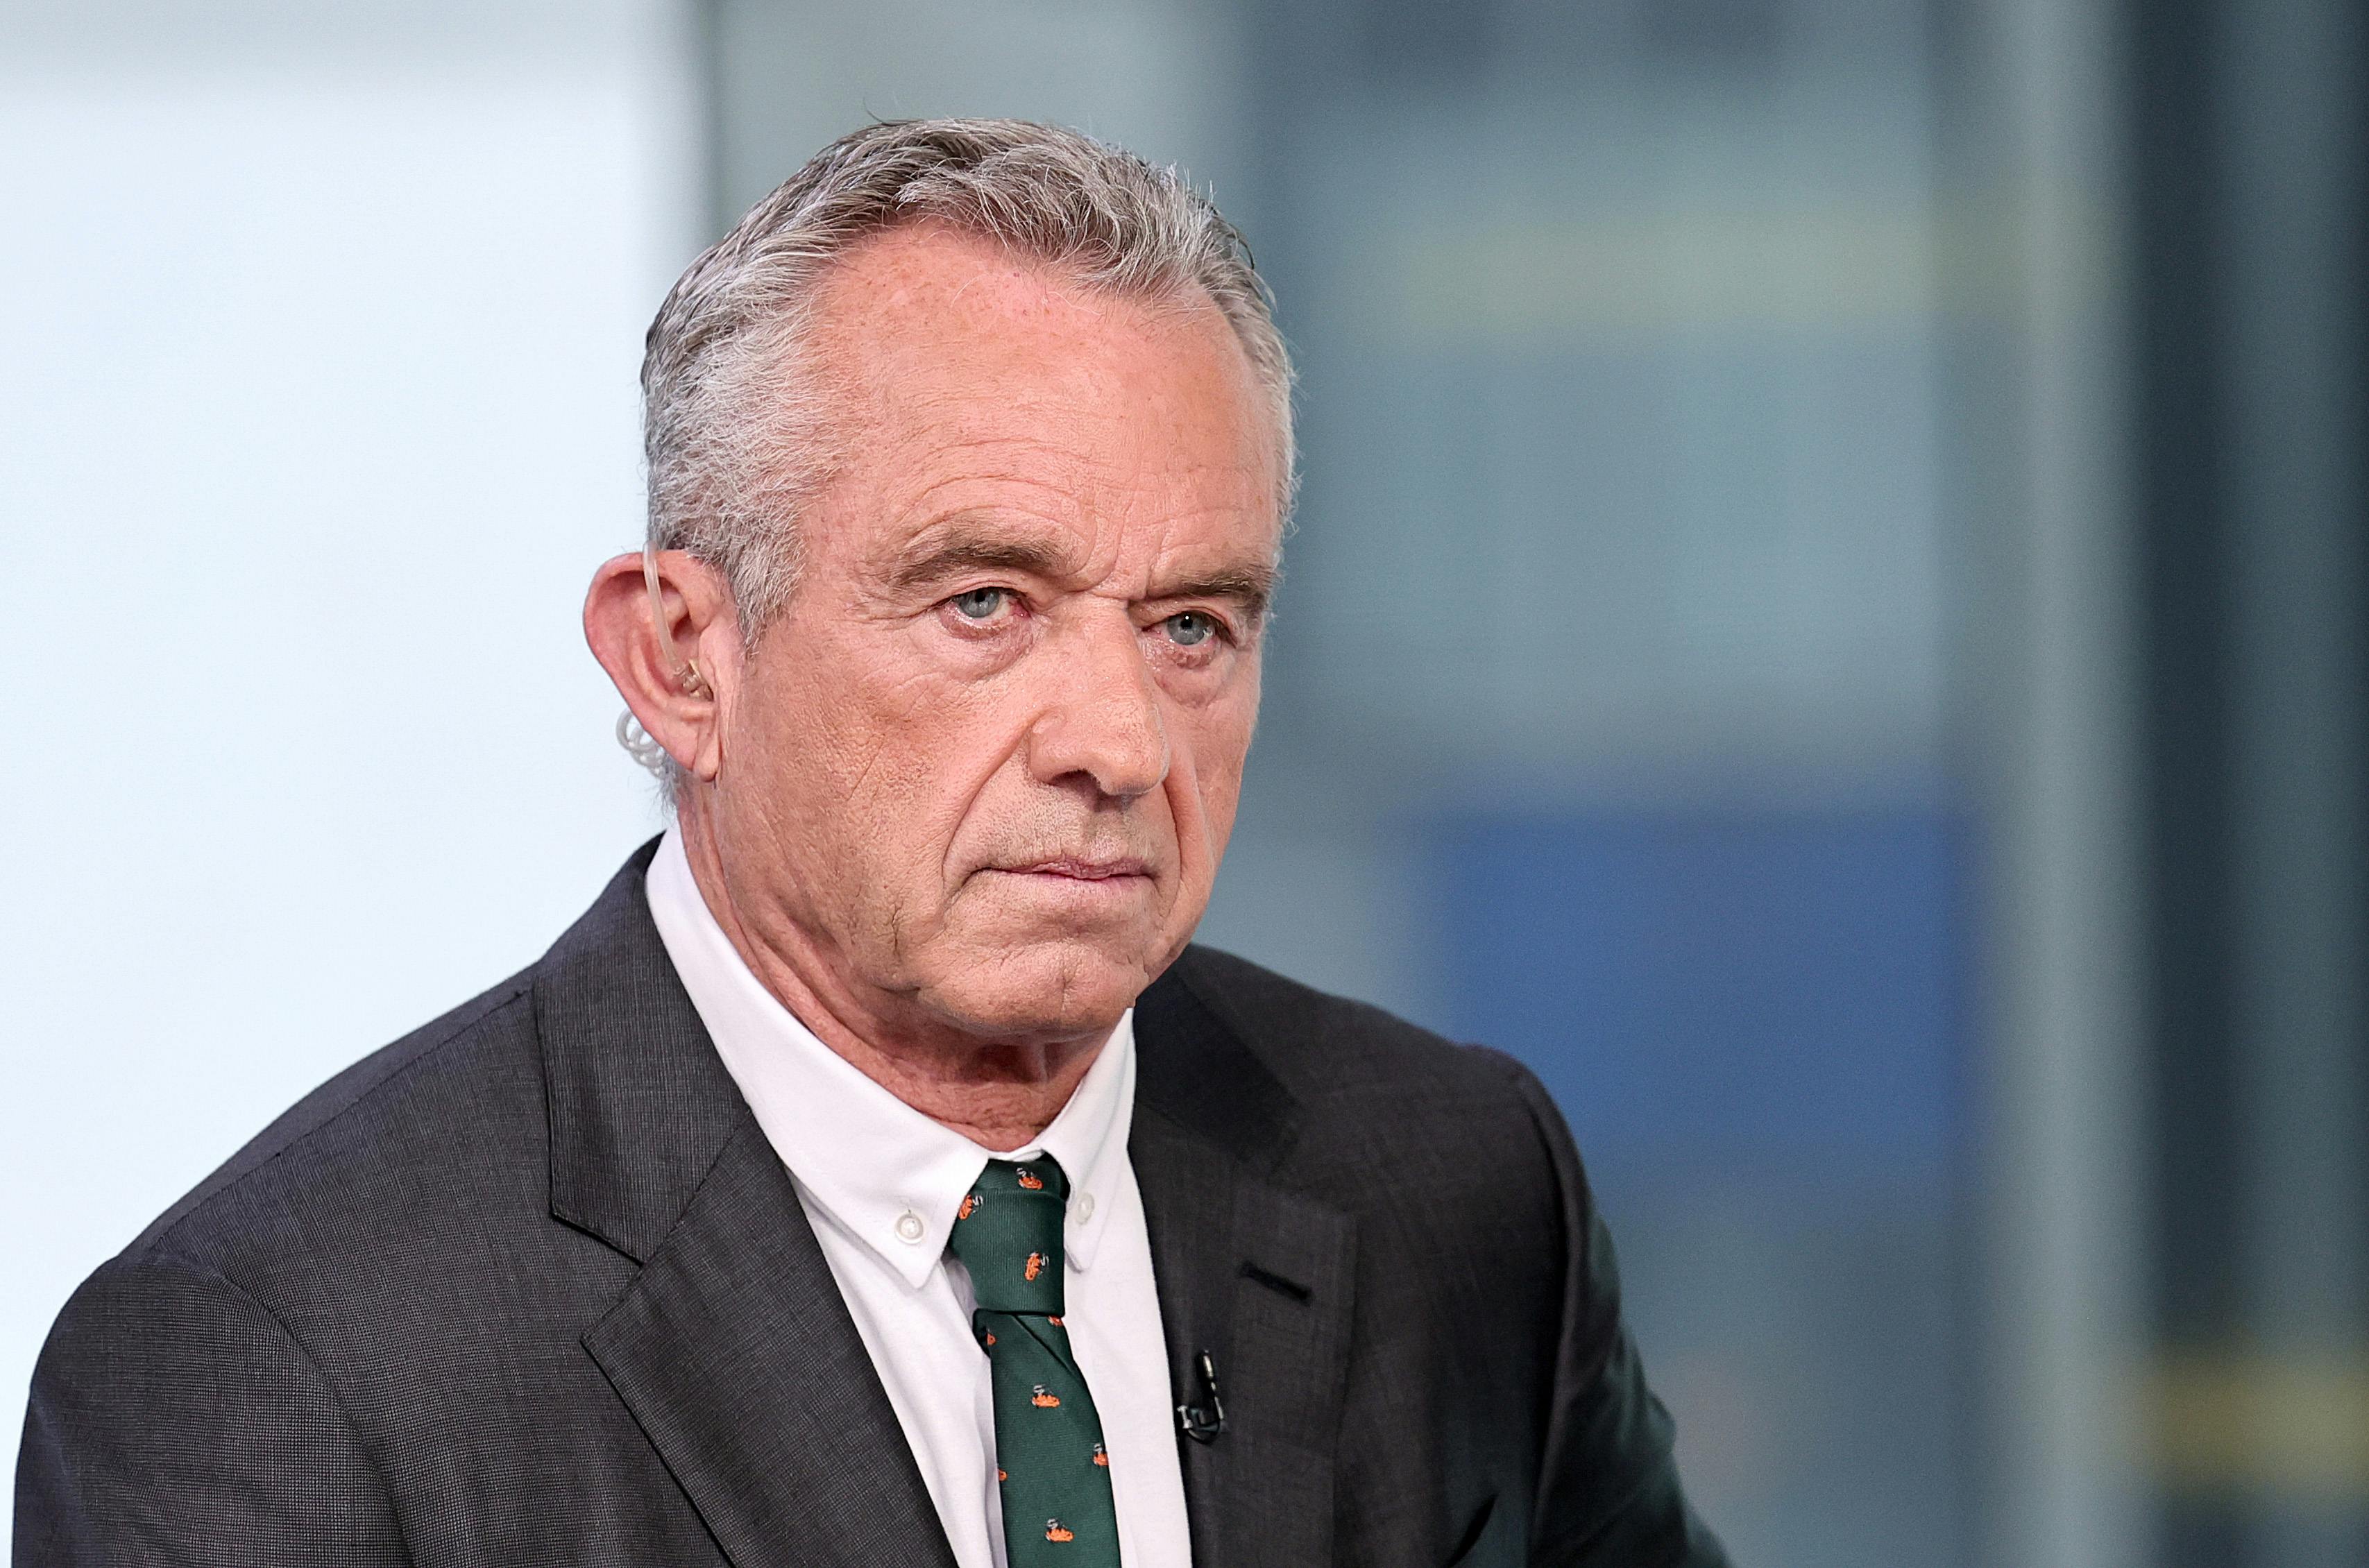 RFK Jr. Campaign’s Crazy New Low: Strategic Farting by Climate Denialist